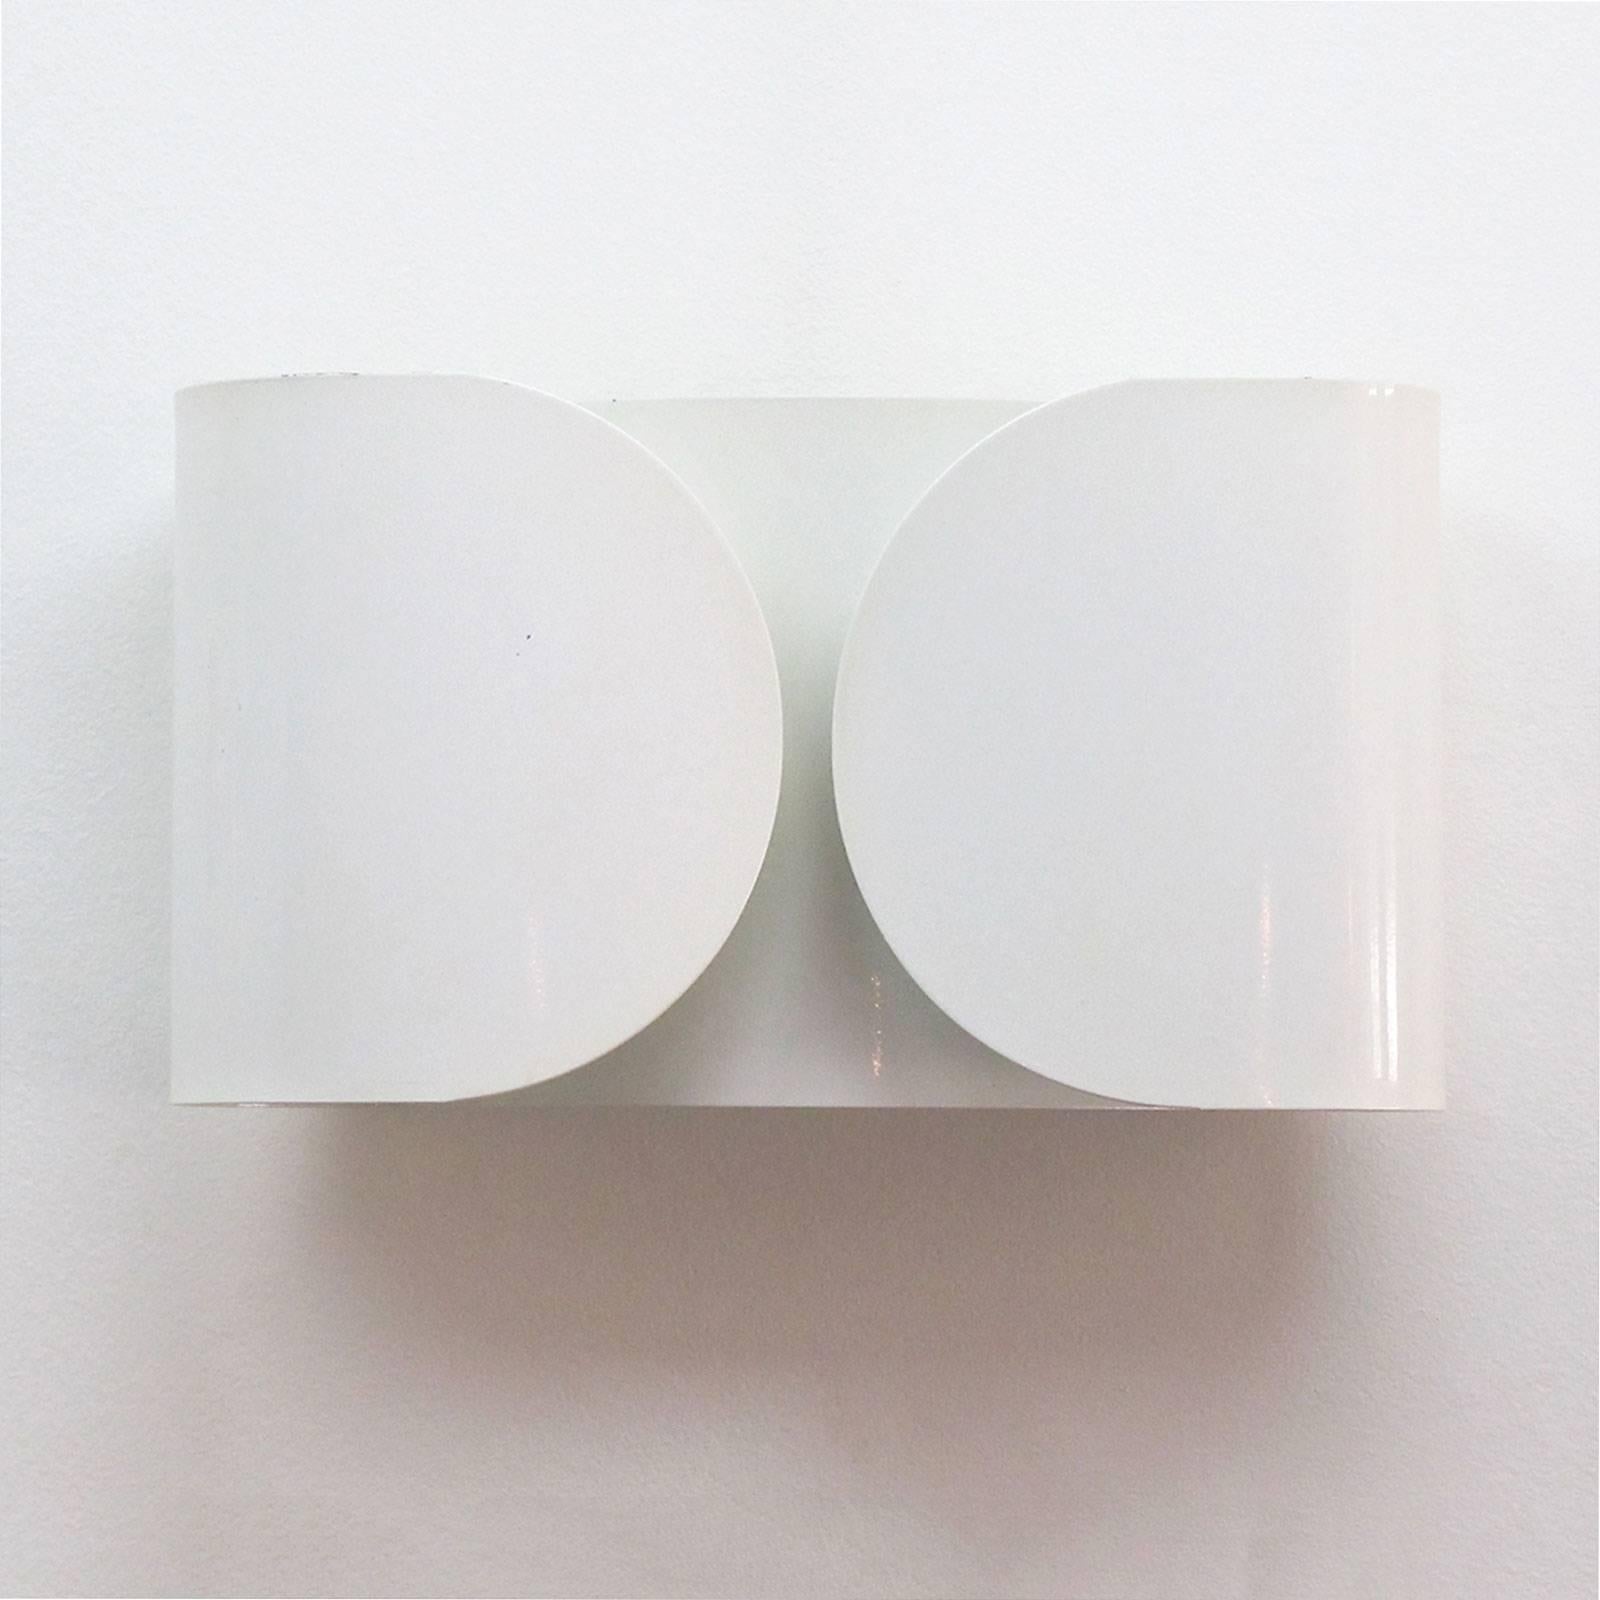 Wonderful wall lights by designed by Tobia Scarpa for Flos in 1966, made from a single folded sheet of white enameled metal enveloping two-light sources. Priced individually.